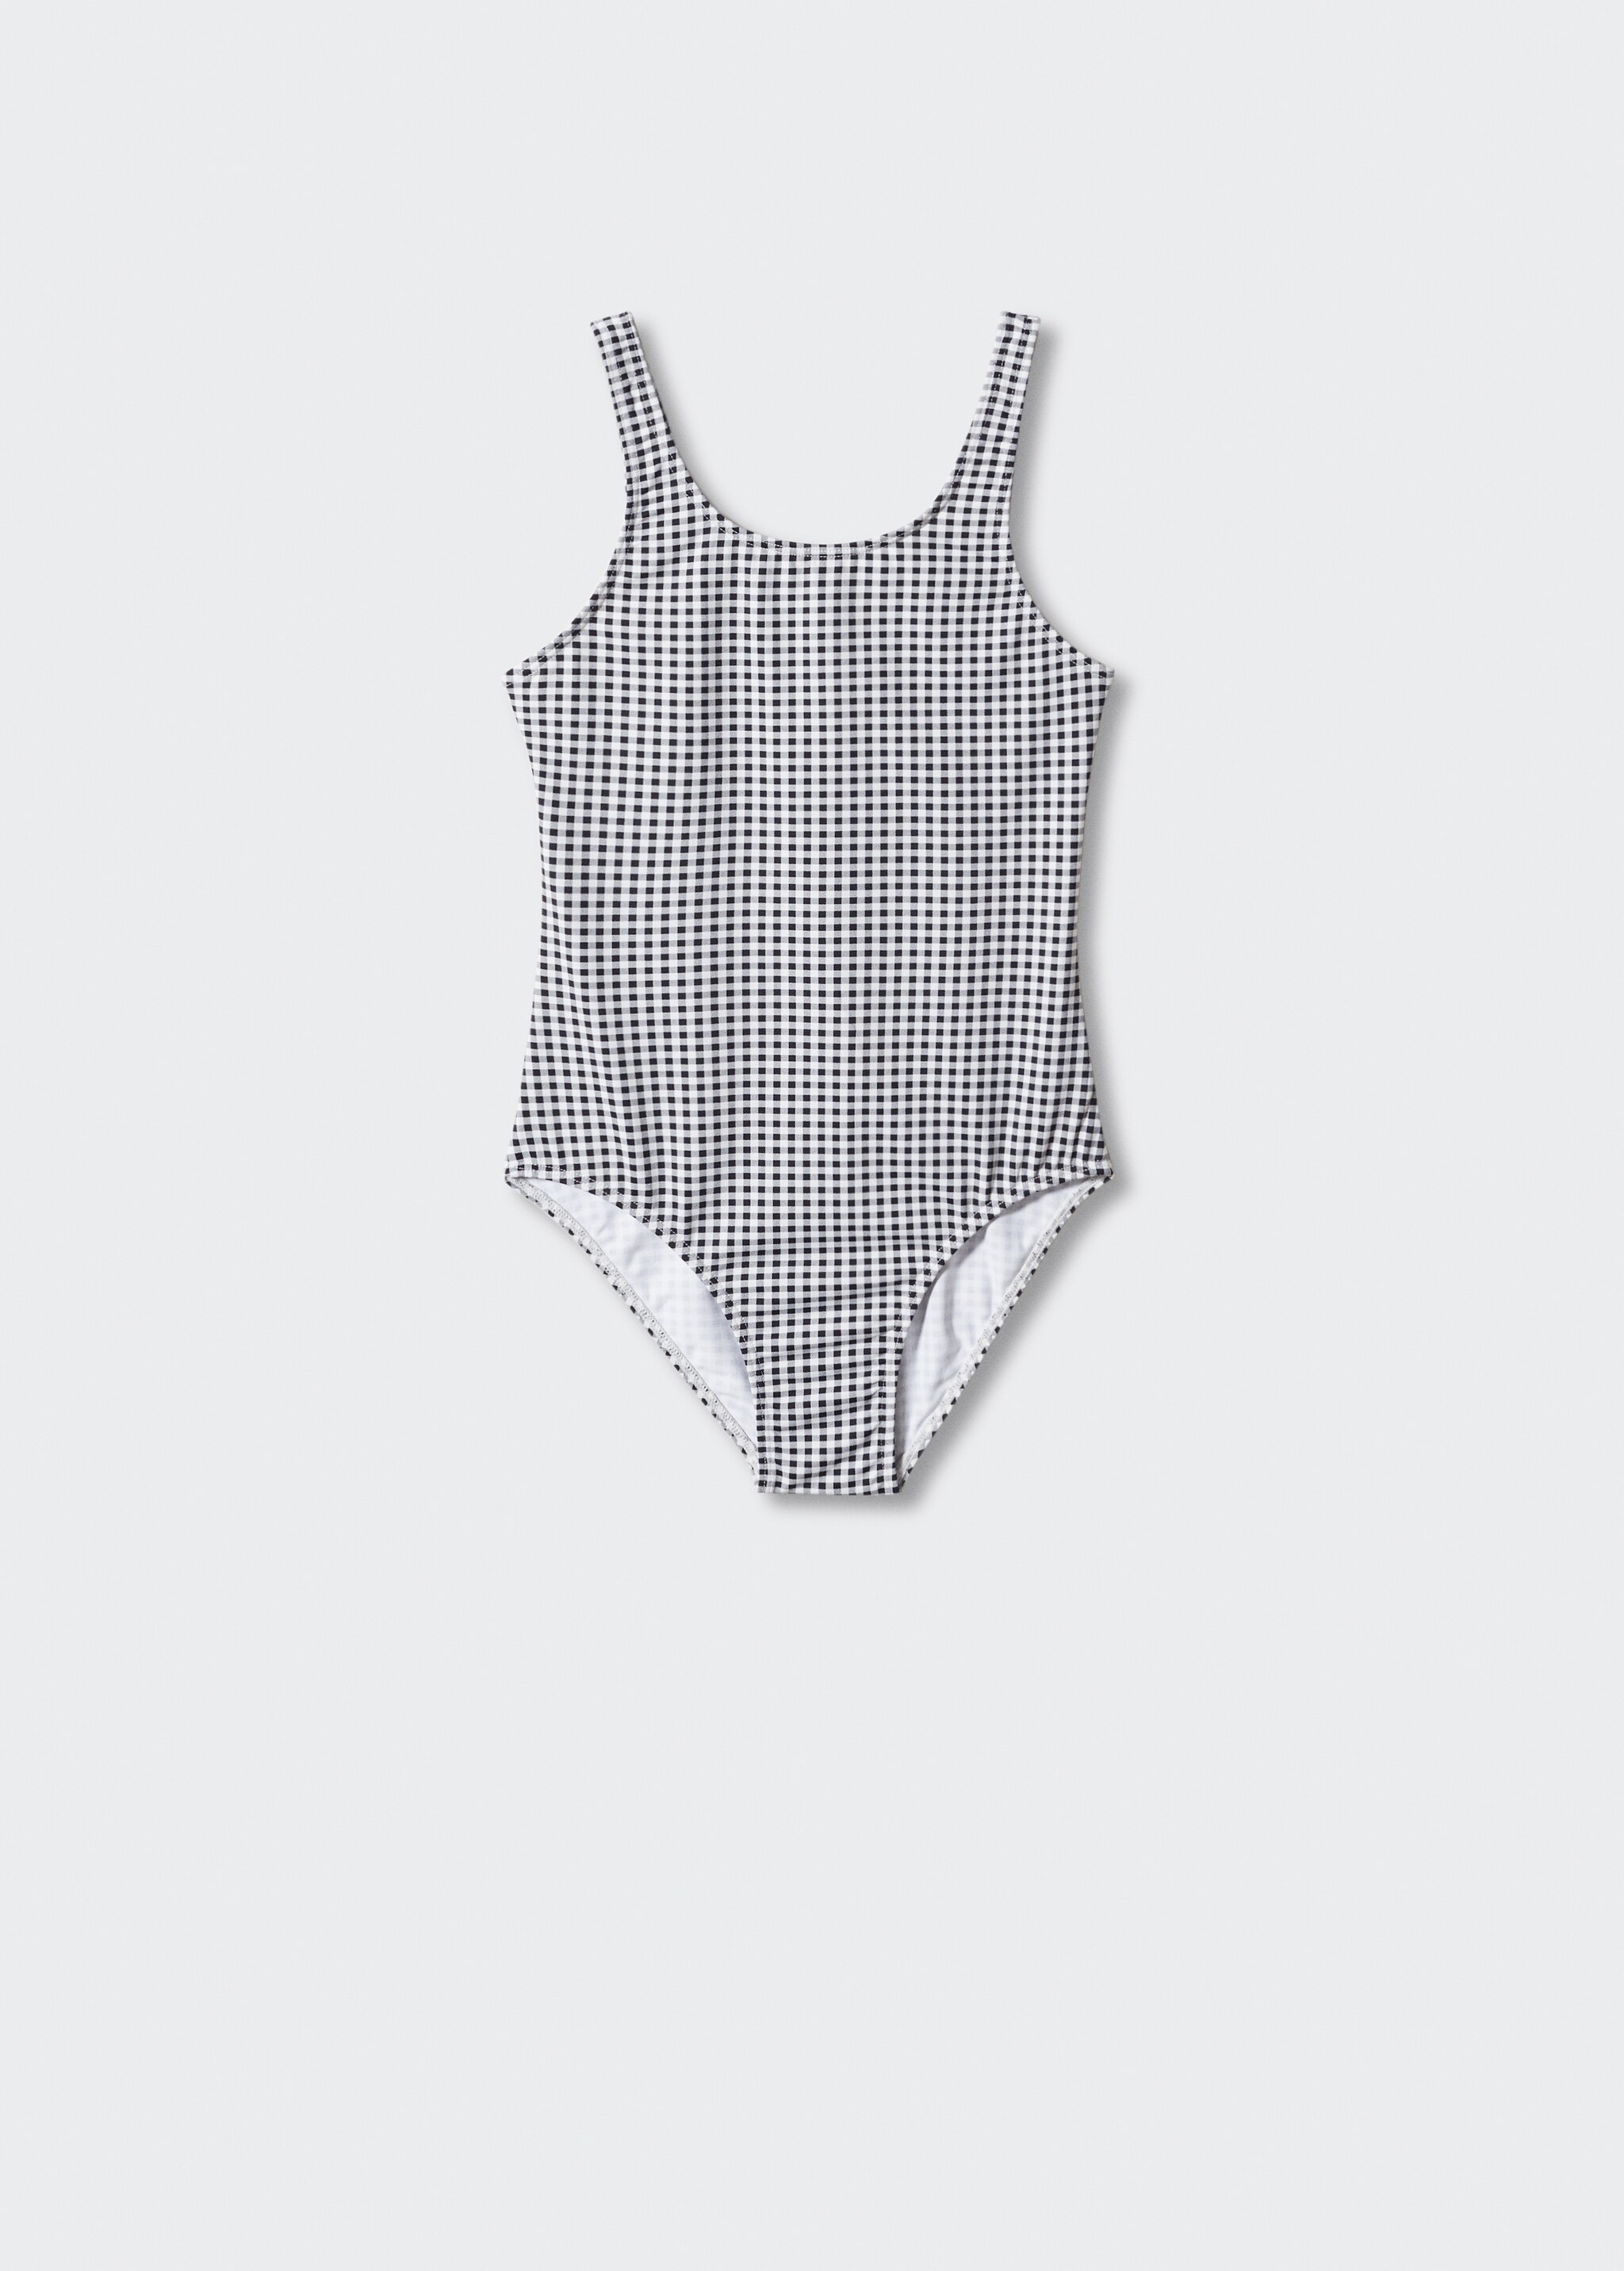 Checked swimsuit - Article without model